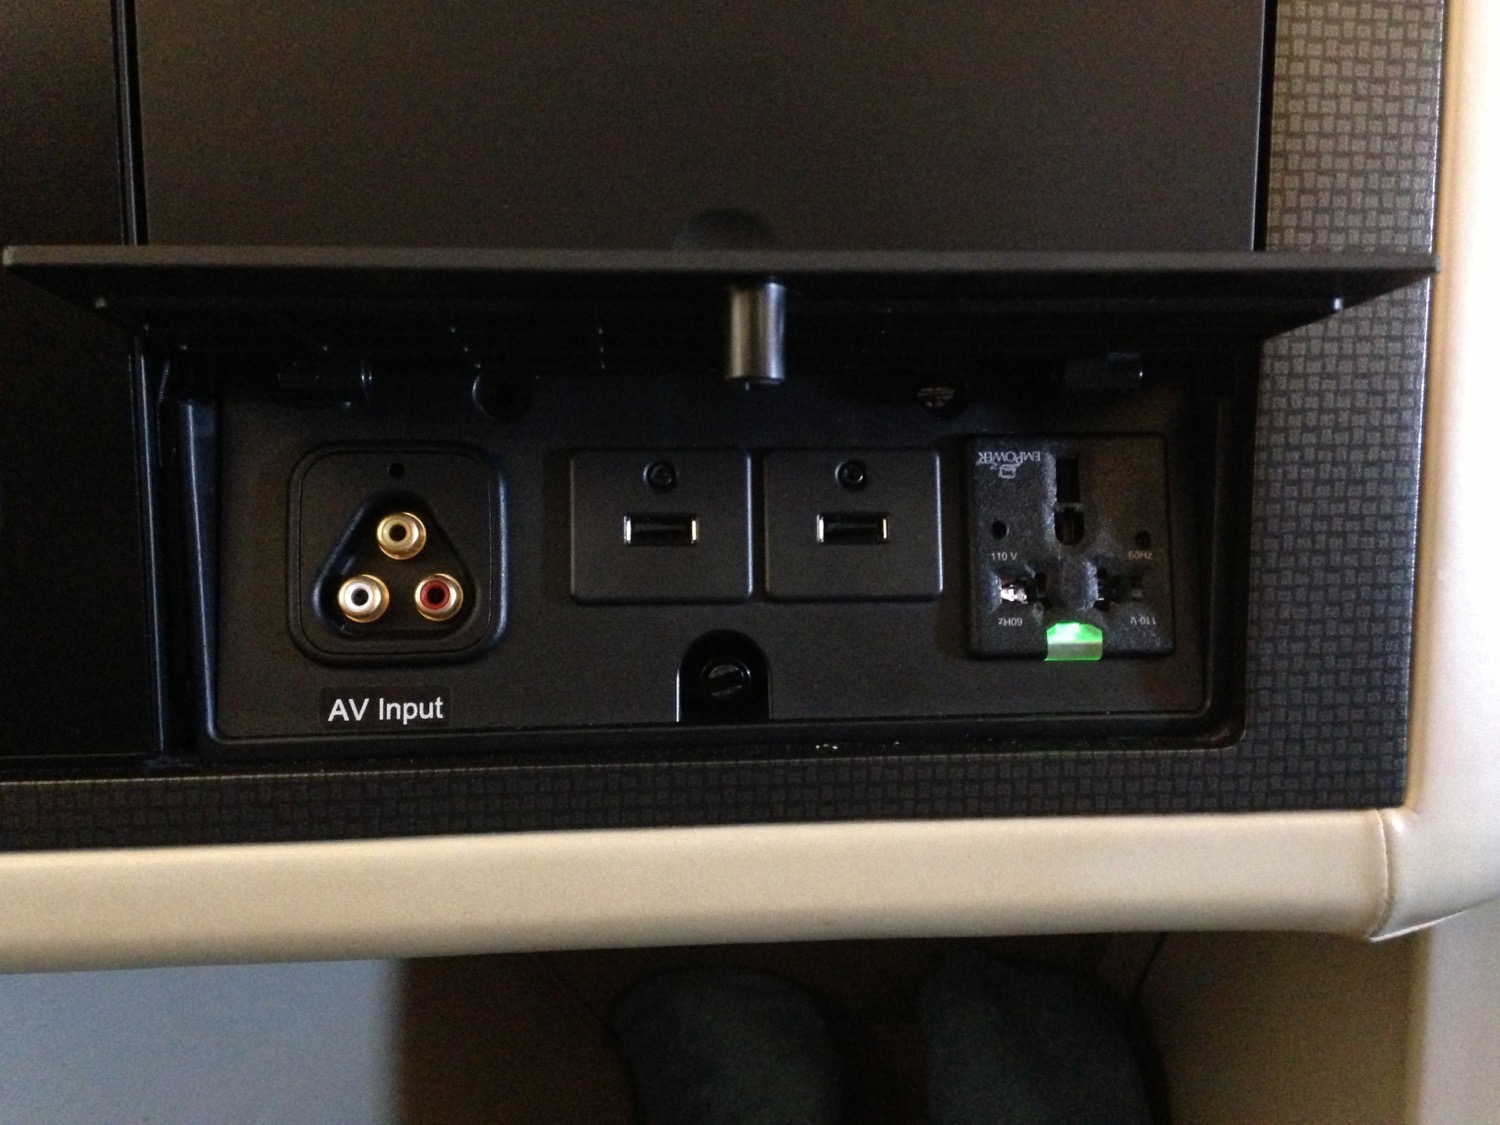 a black rectangular device with plugs and ports